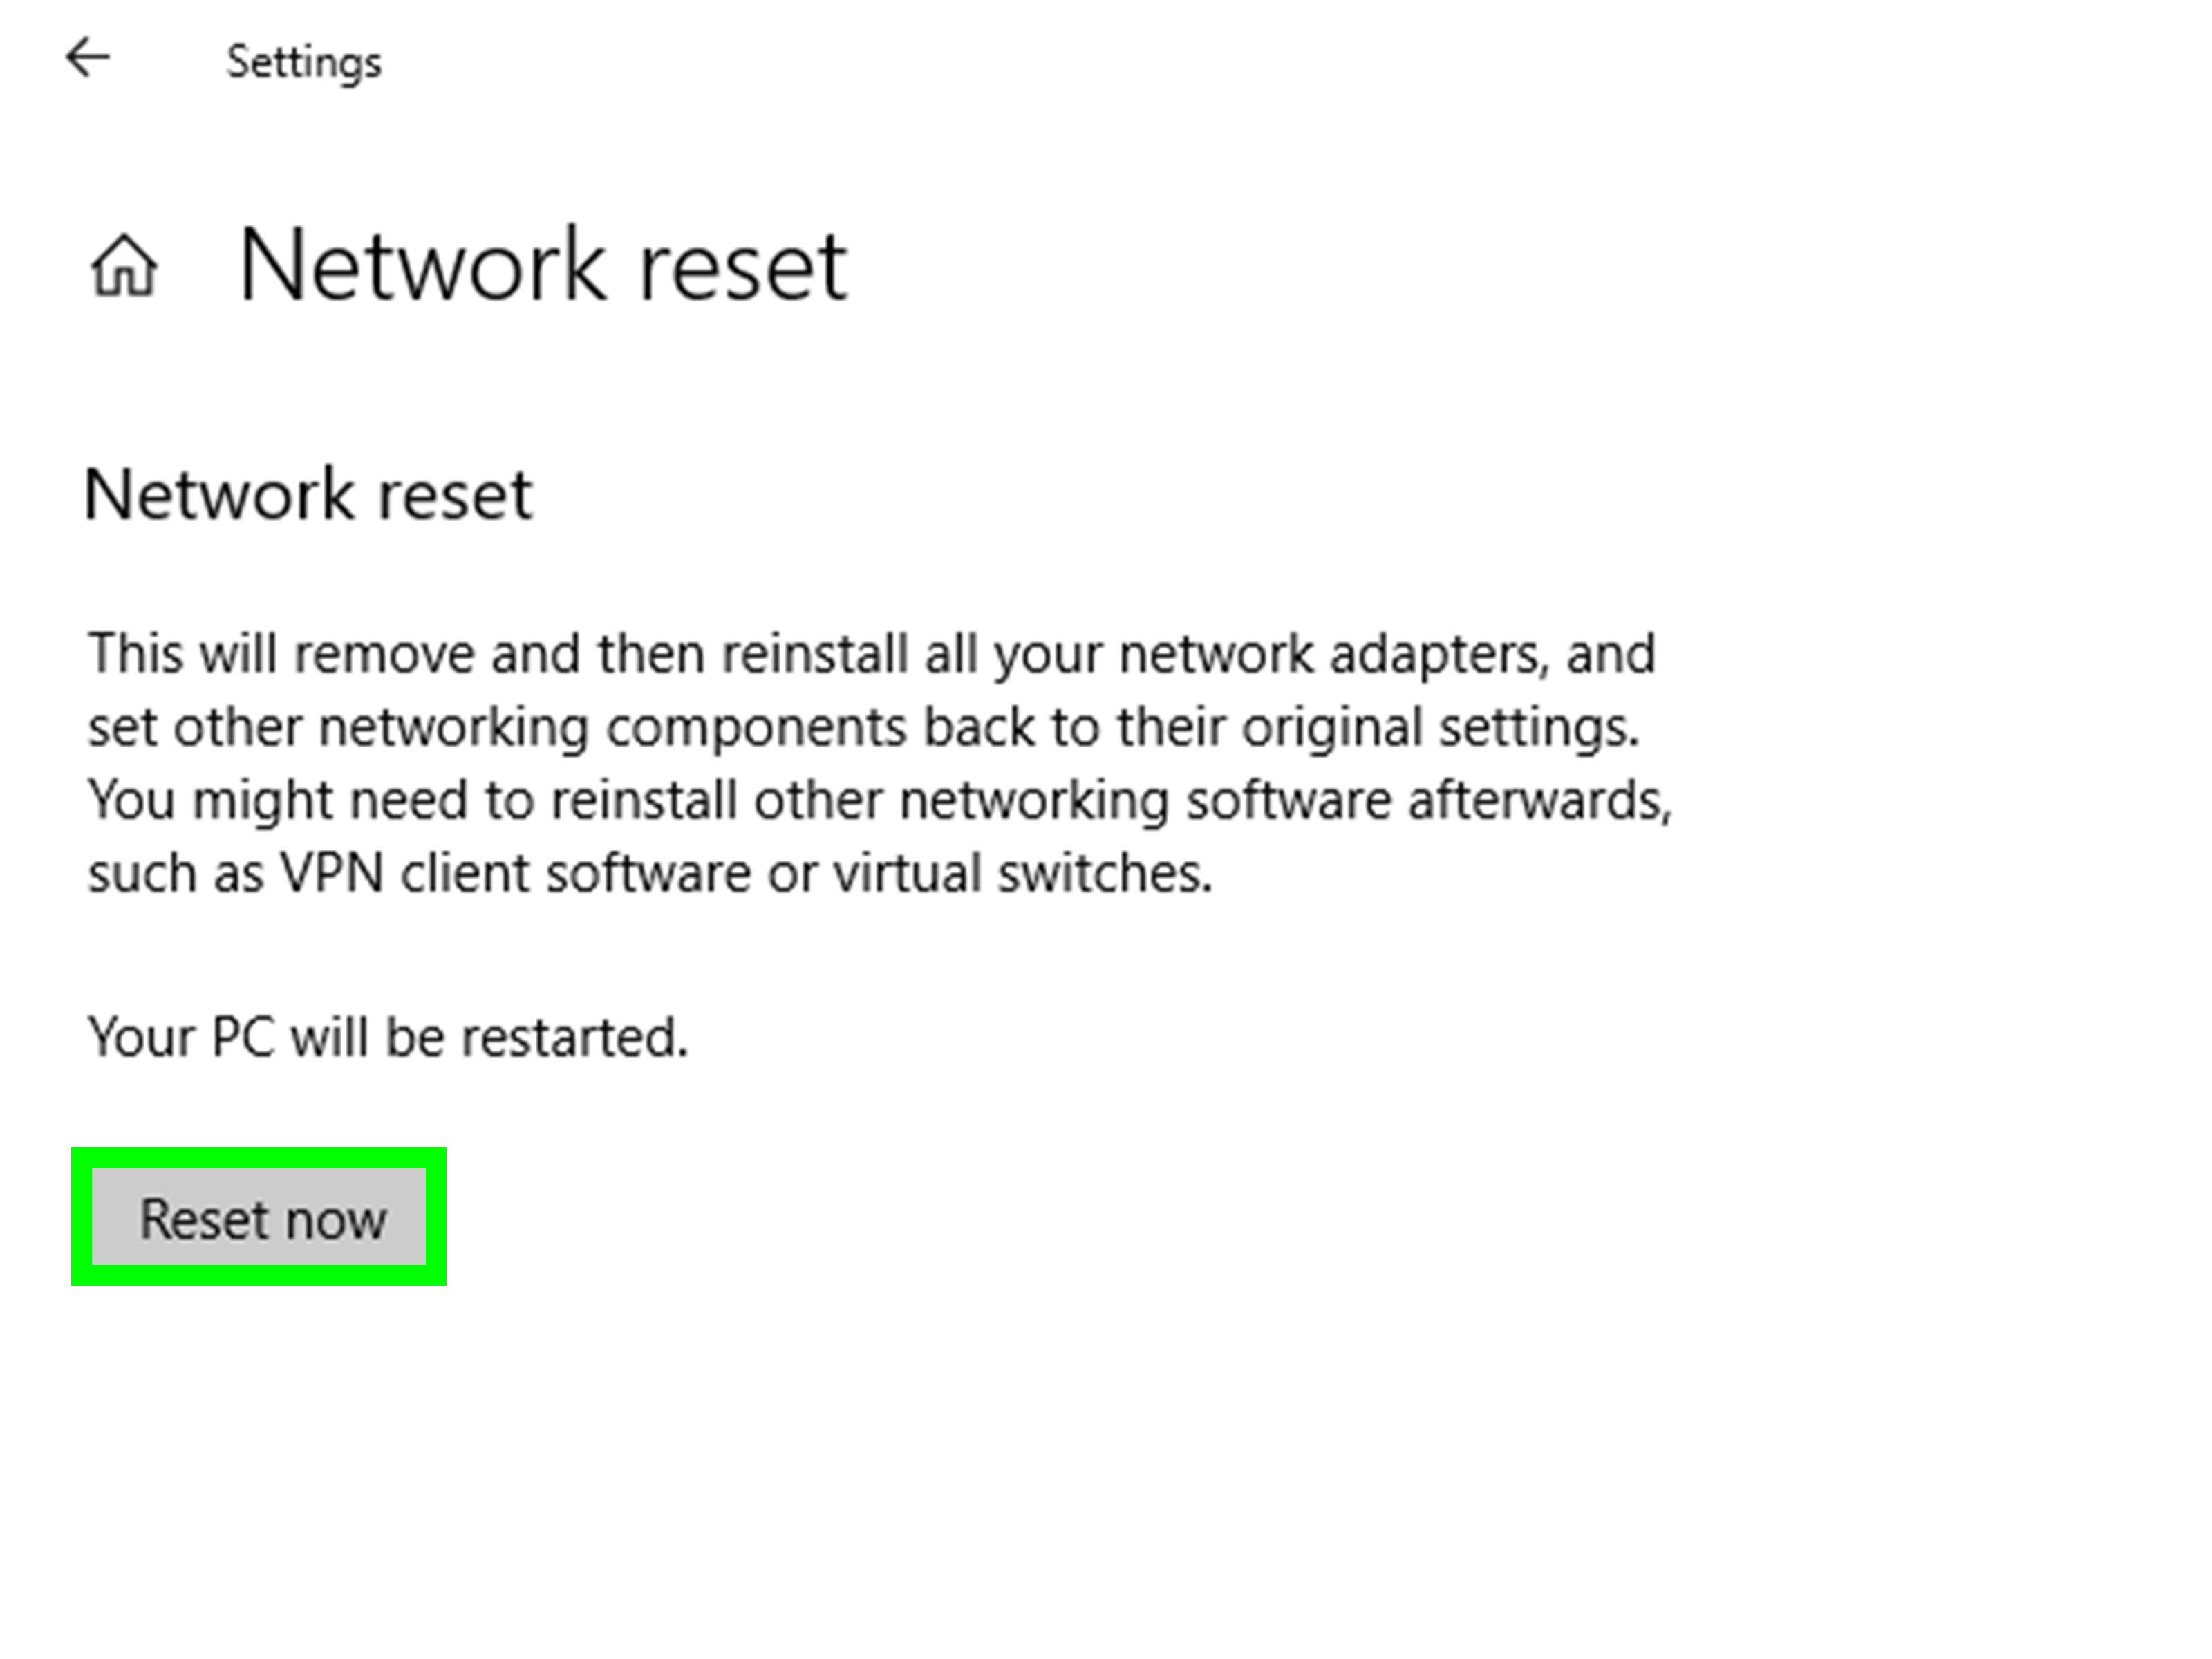 Restart your computer.
Windows will automatically reinstall the touchpad drivers upon restart.